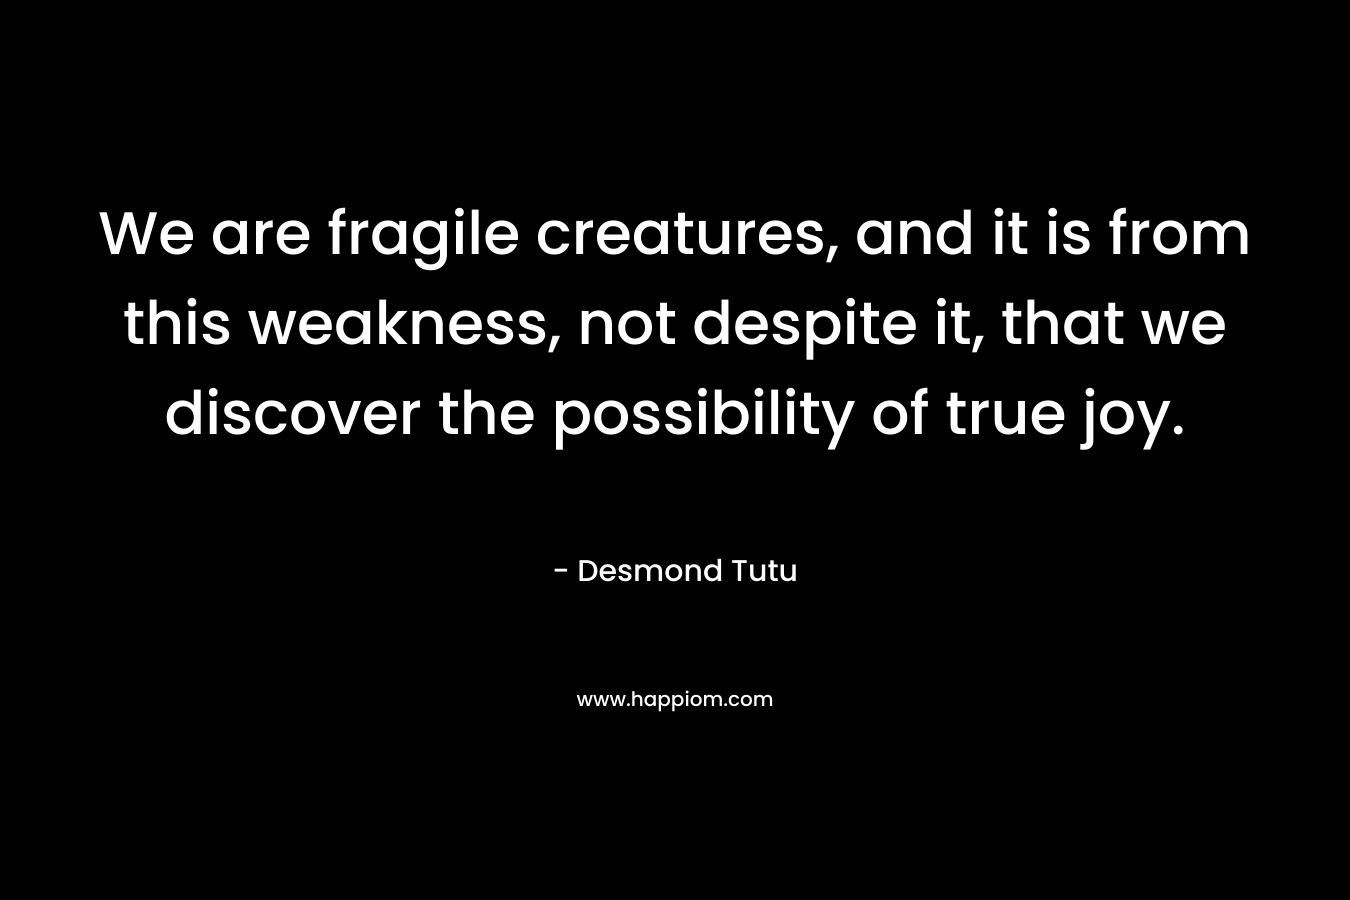 We are fragile creatures, and it is from this weakness, not despite it, that we discover the possibility of true joy. – Desmond Tutu